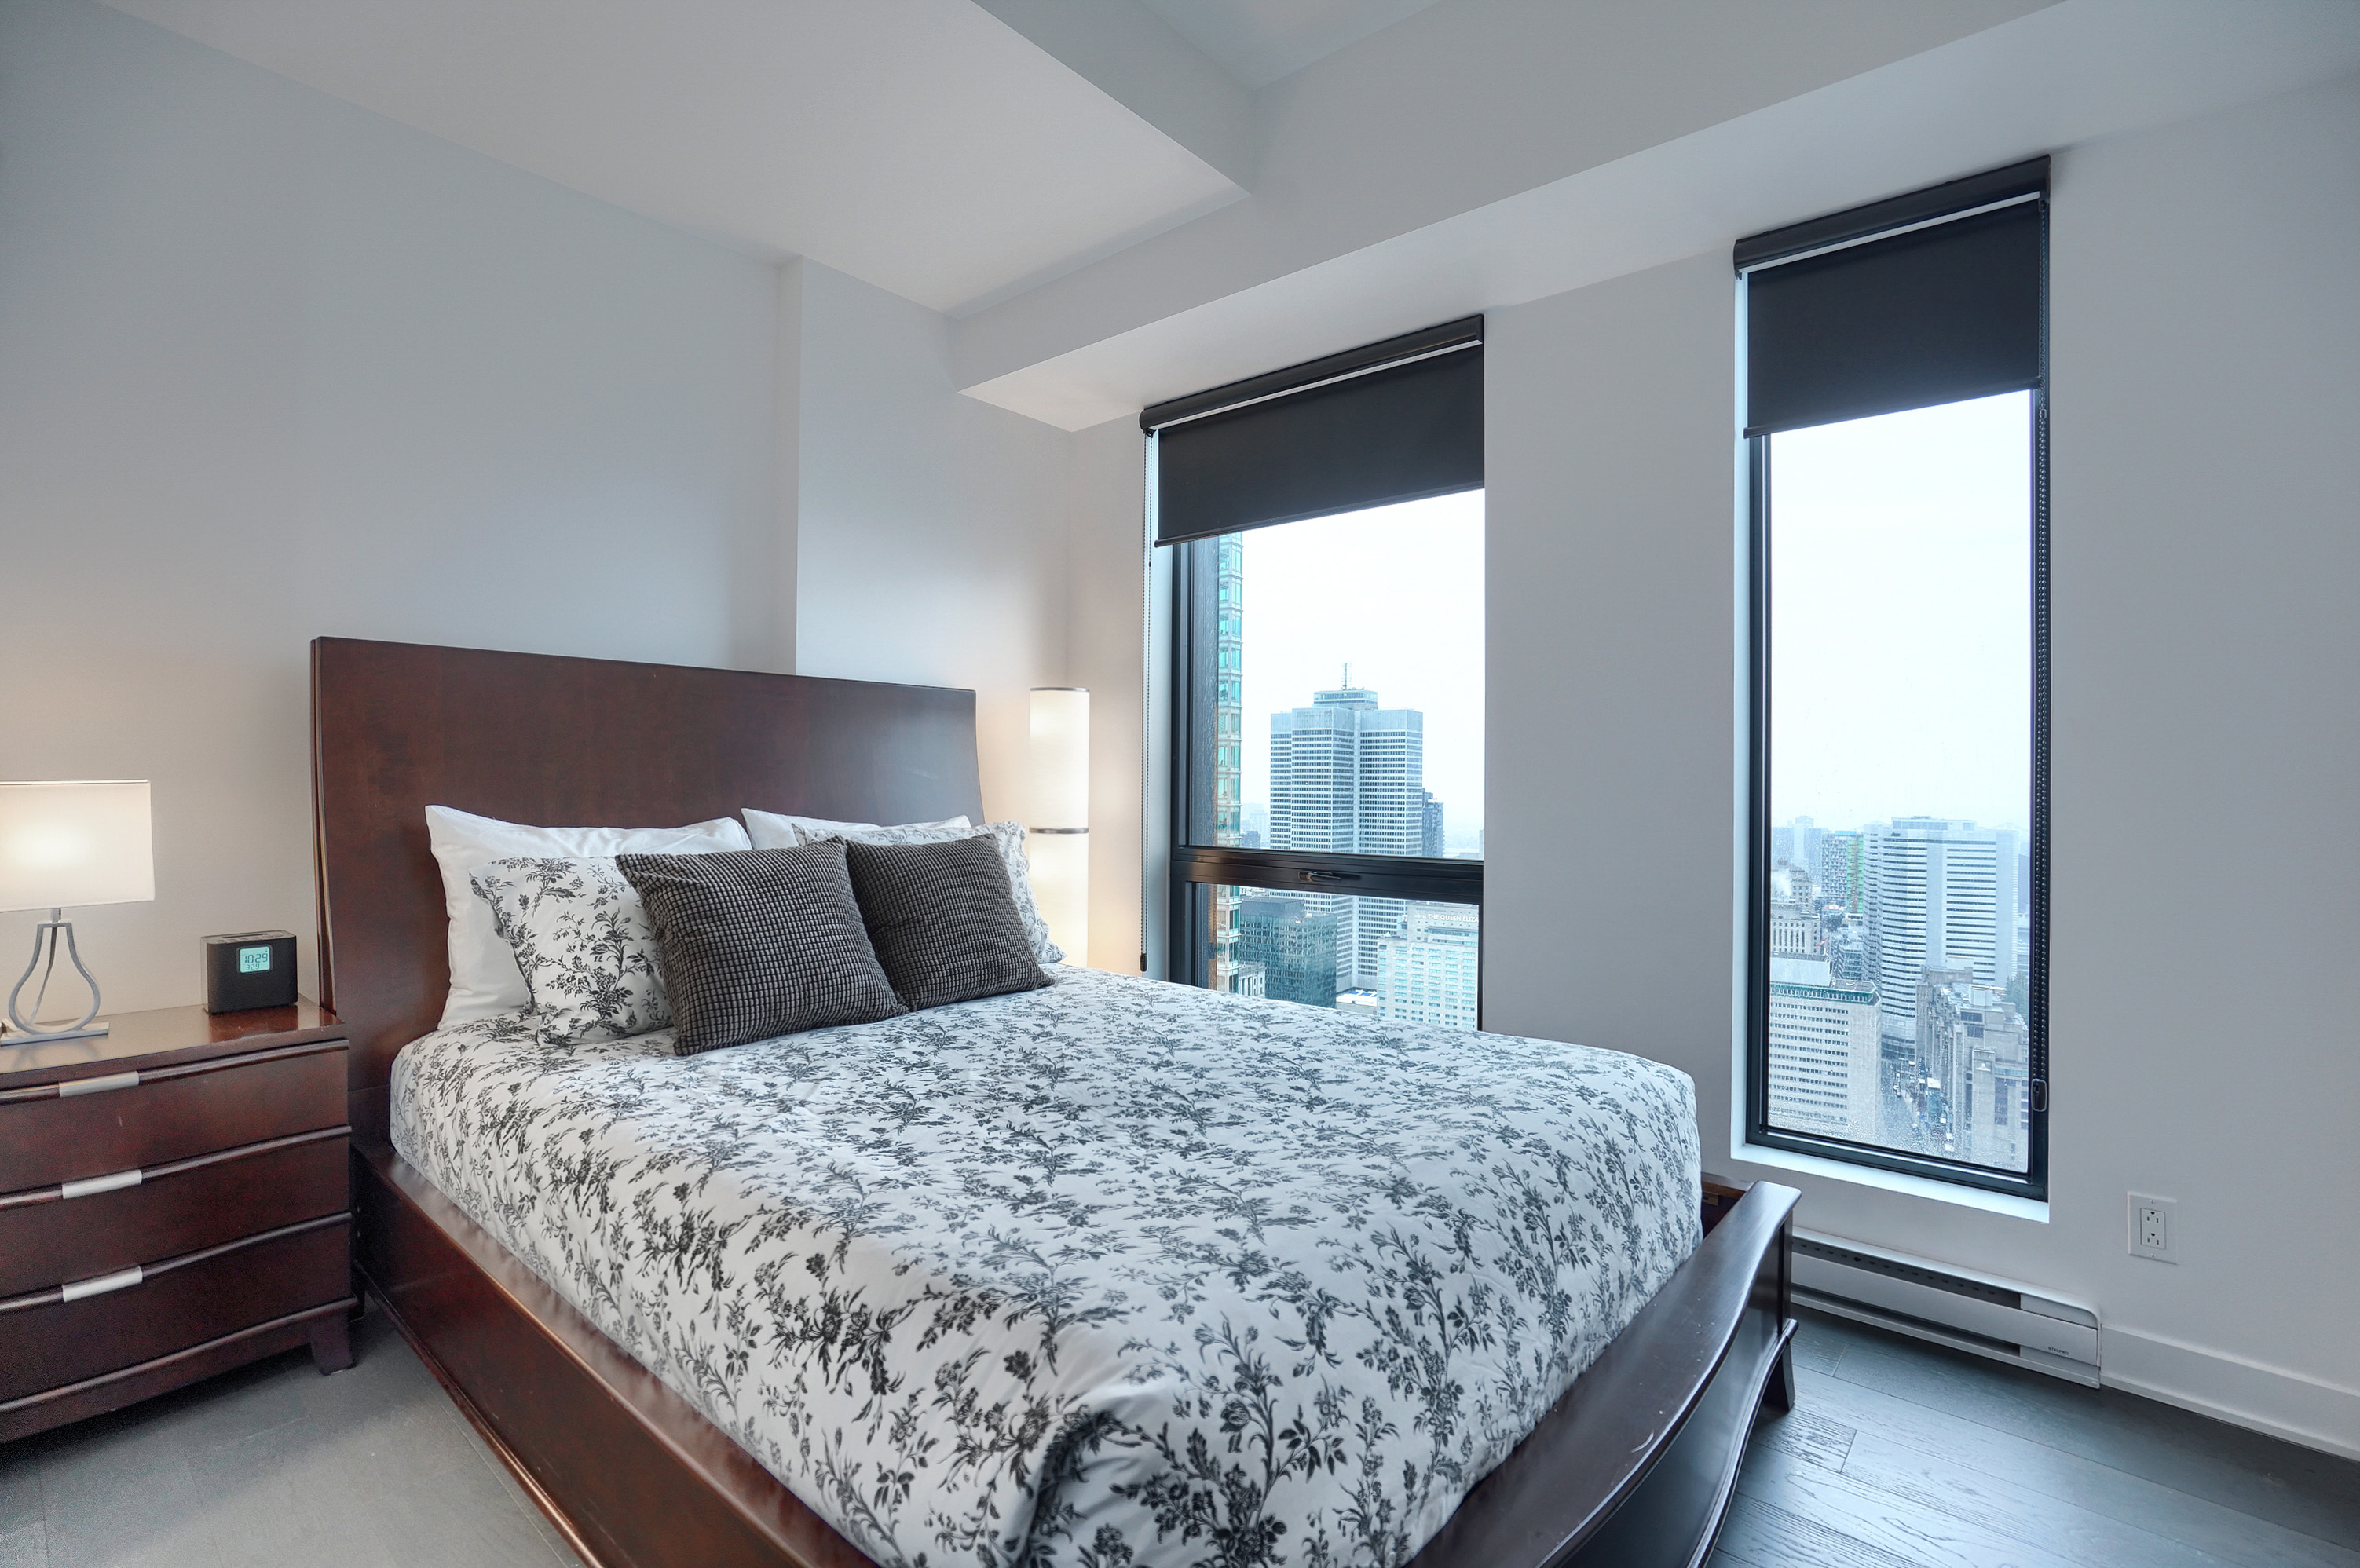 View of the master bedroom in this luxury furnished short term rental in montreal. Comfy white and gray flowered bedding with white and gray accent pillows. Mahogany headboard with matching night tables.  